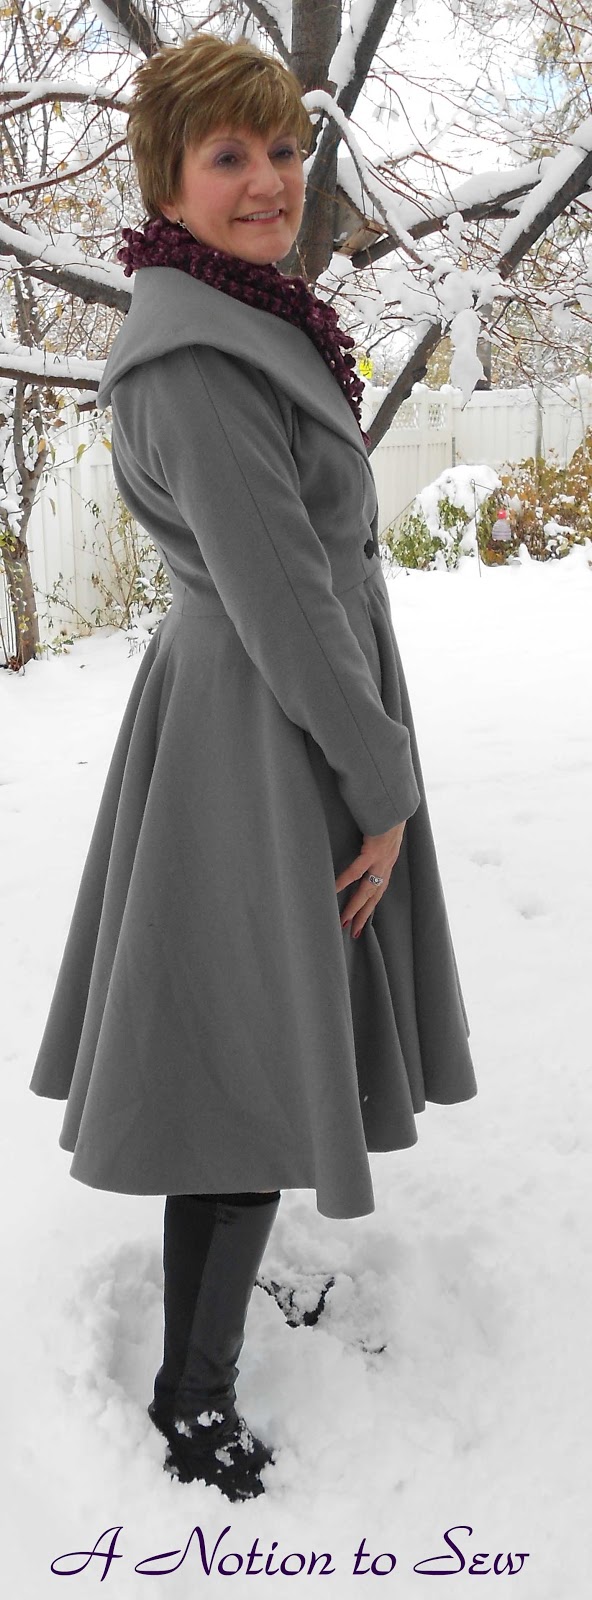 a notion to sew: Butterick 5824: Grey Wool Coat